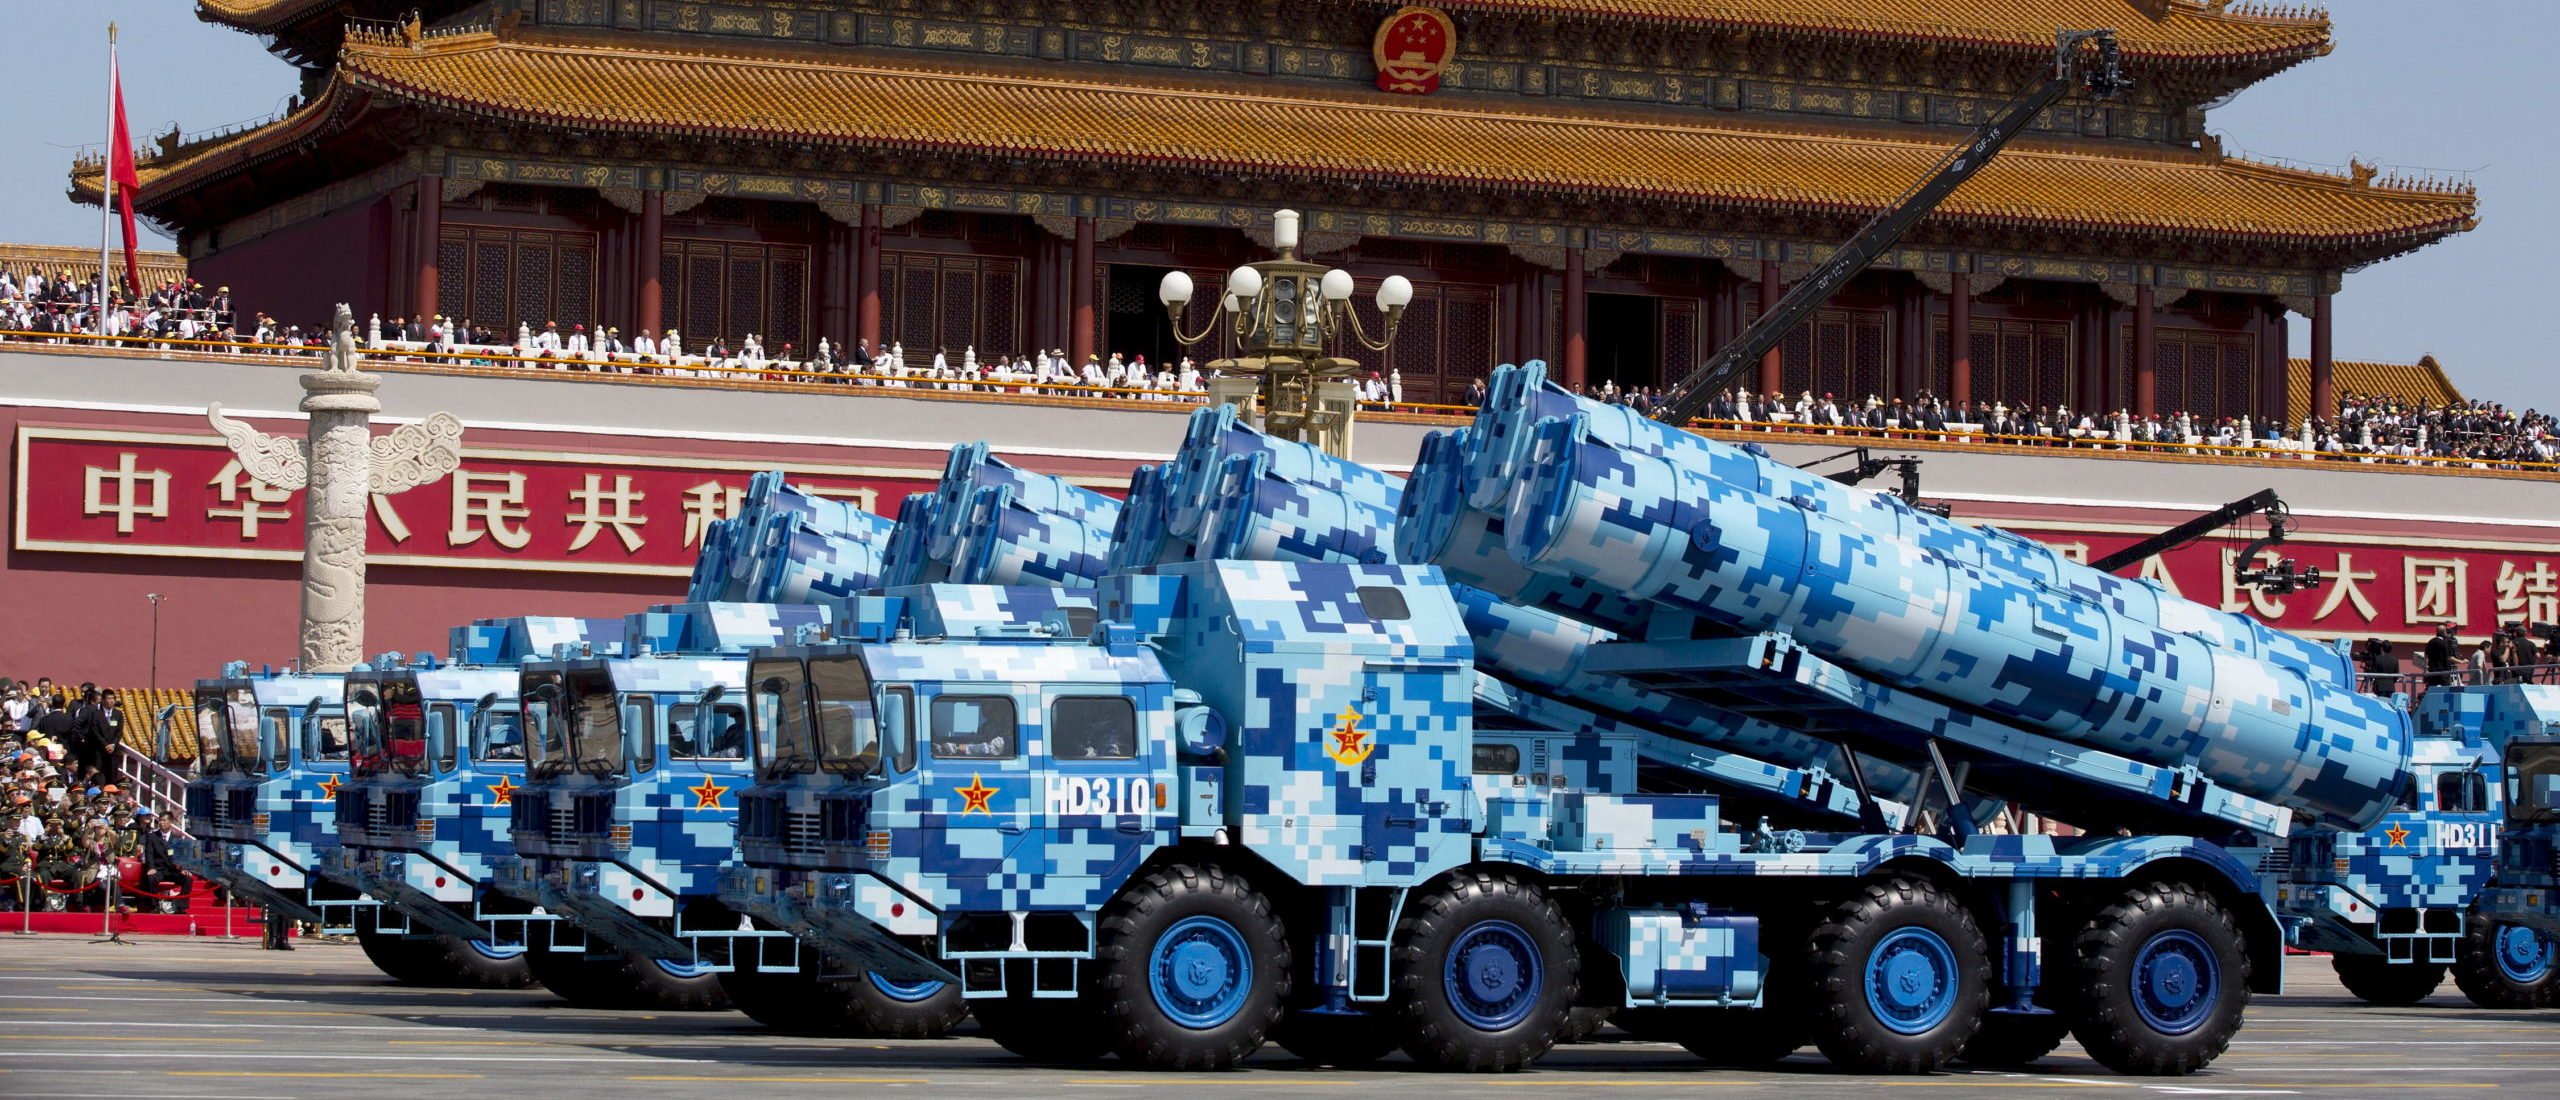 Chinese Military Surrounds Taiwan In Massive ‘Rehearsal’ Of Invasion